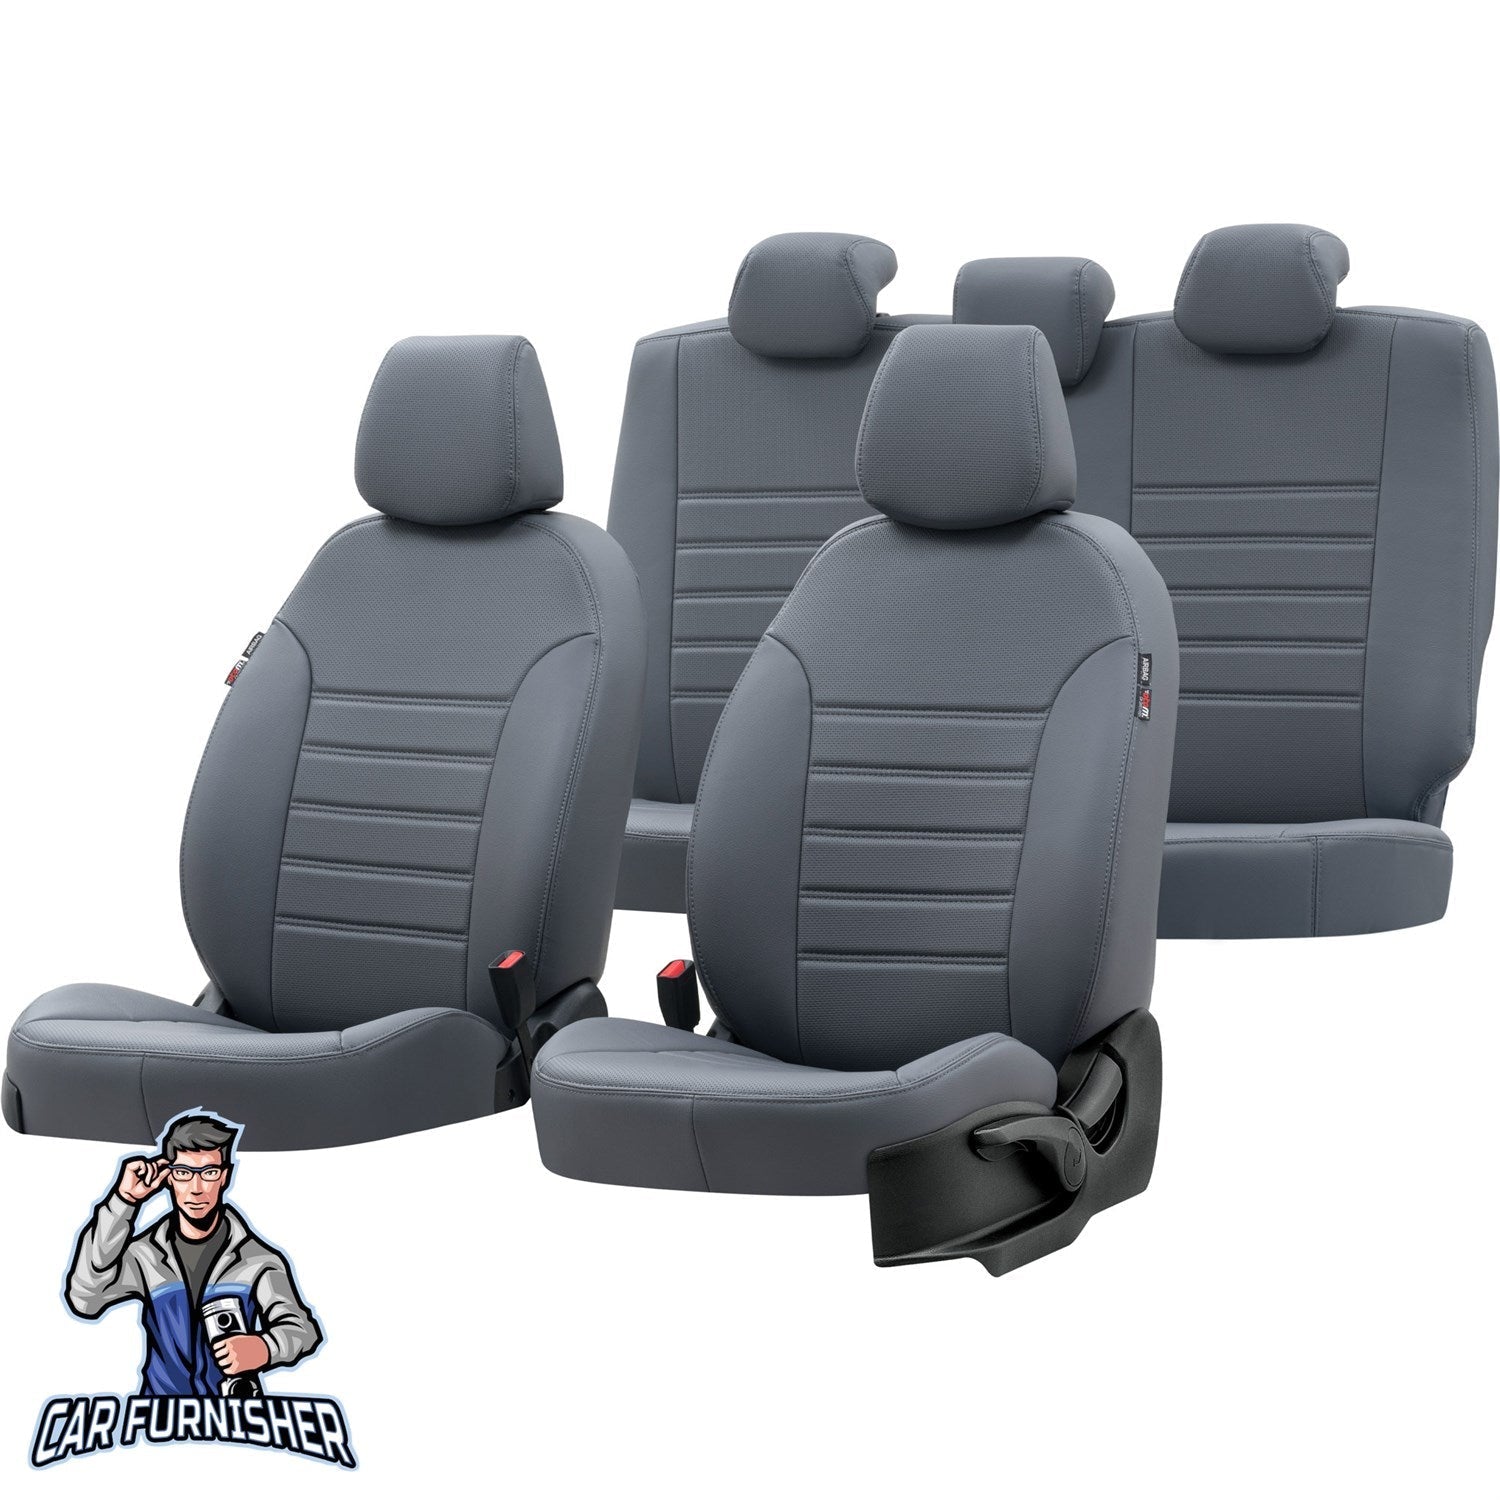 Peugeot 107 Car Seat Covers 2006-2013 New York Design Smoked Full Set (5 Seats + Handrest) Leather & Fabric